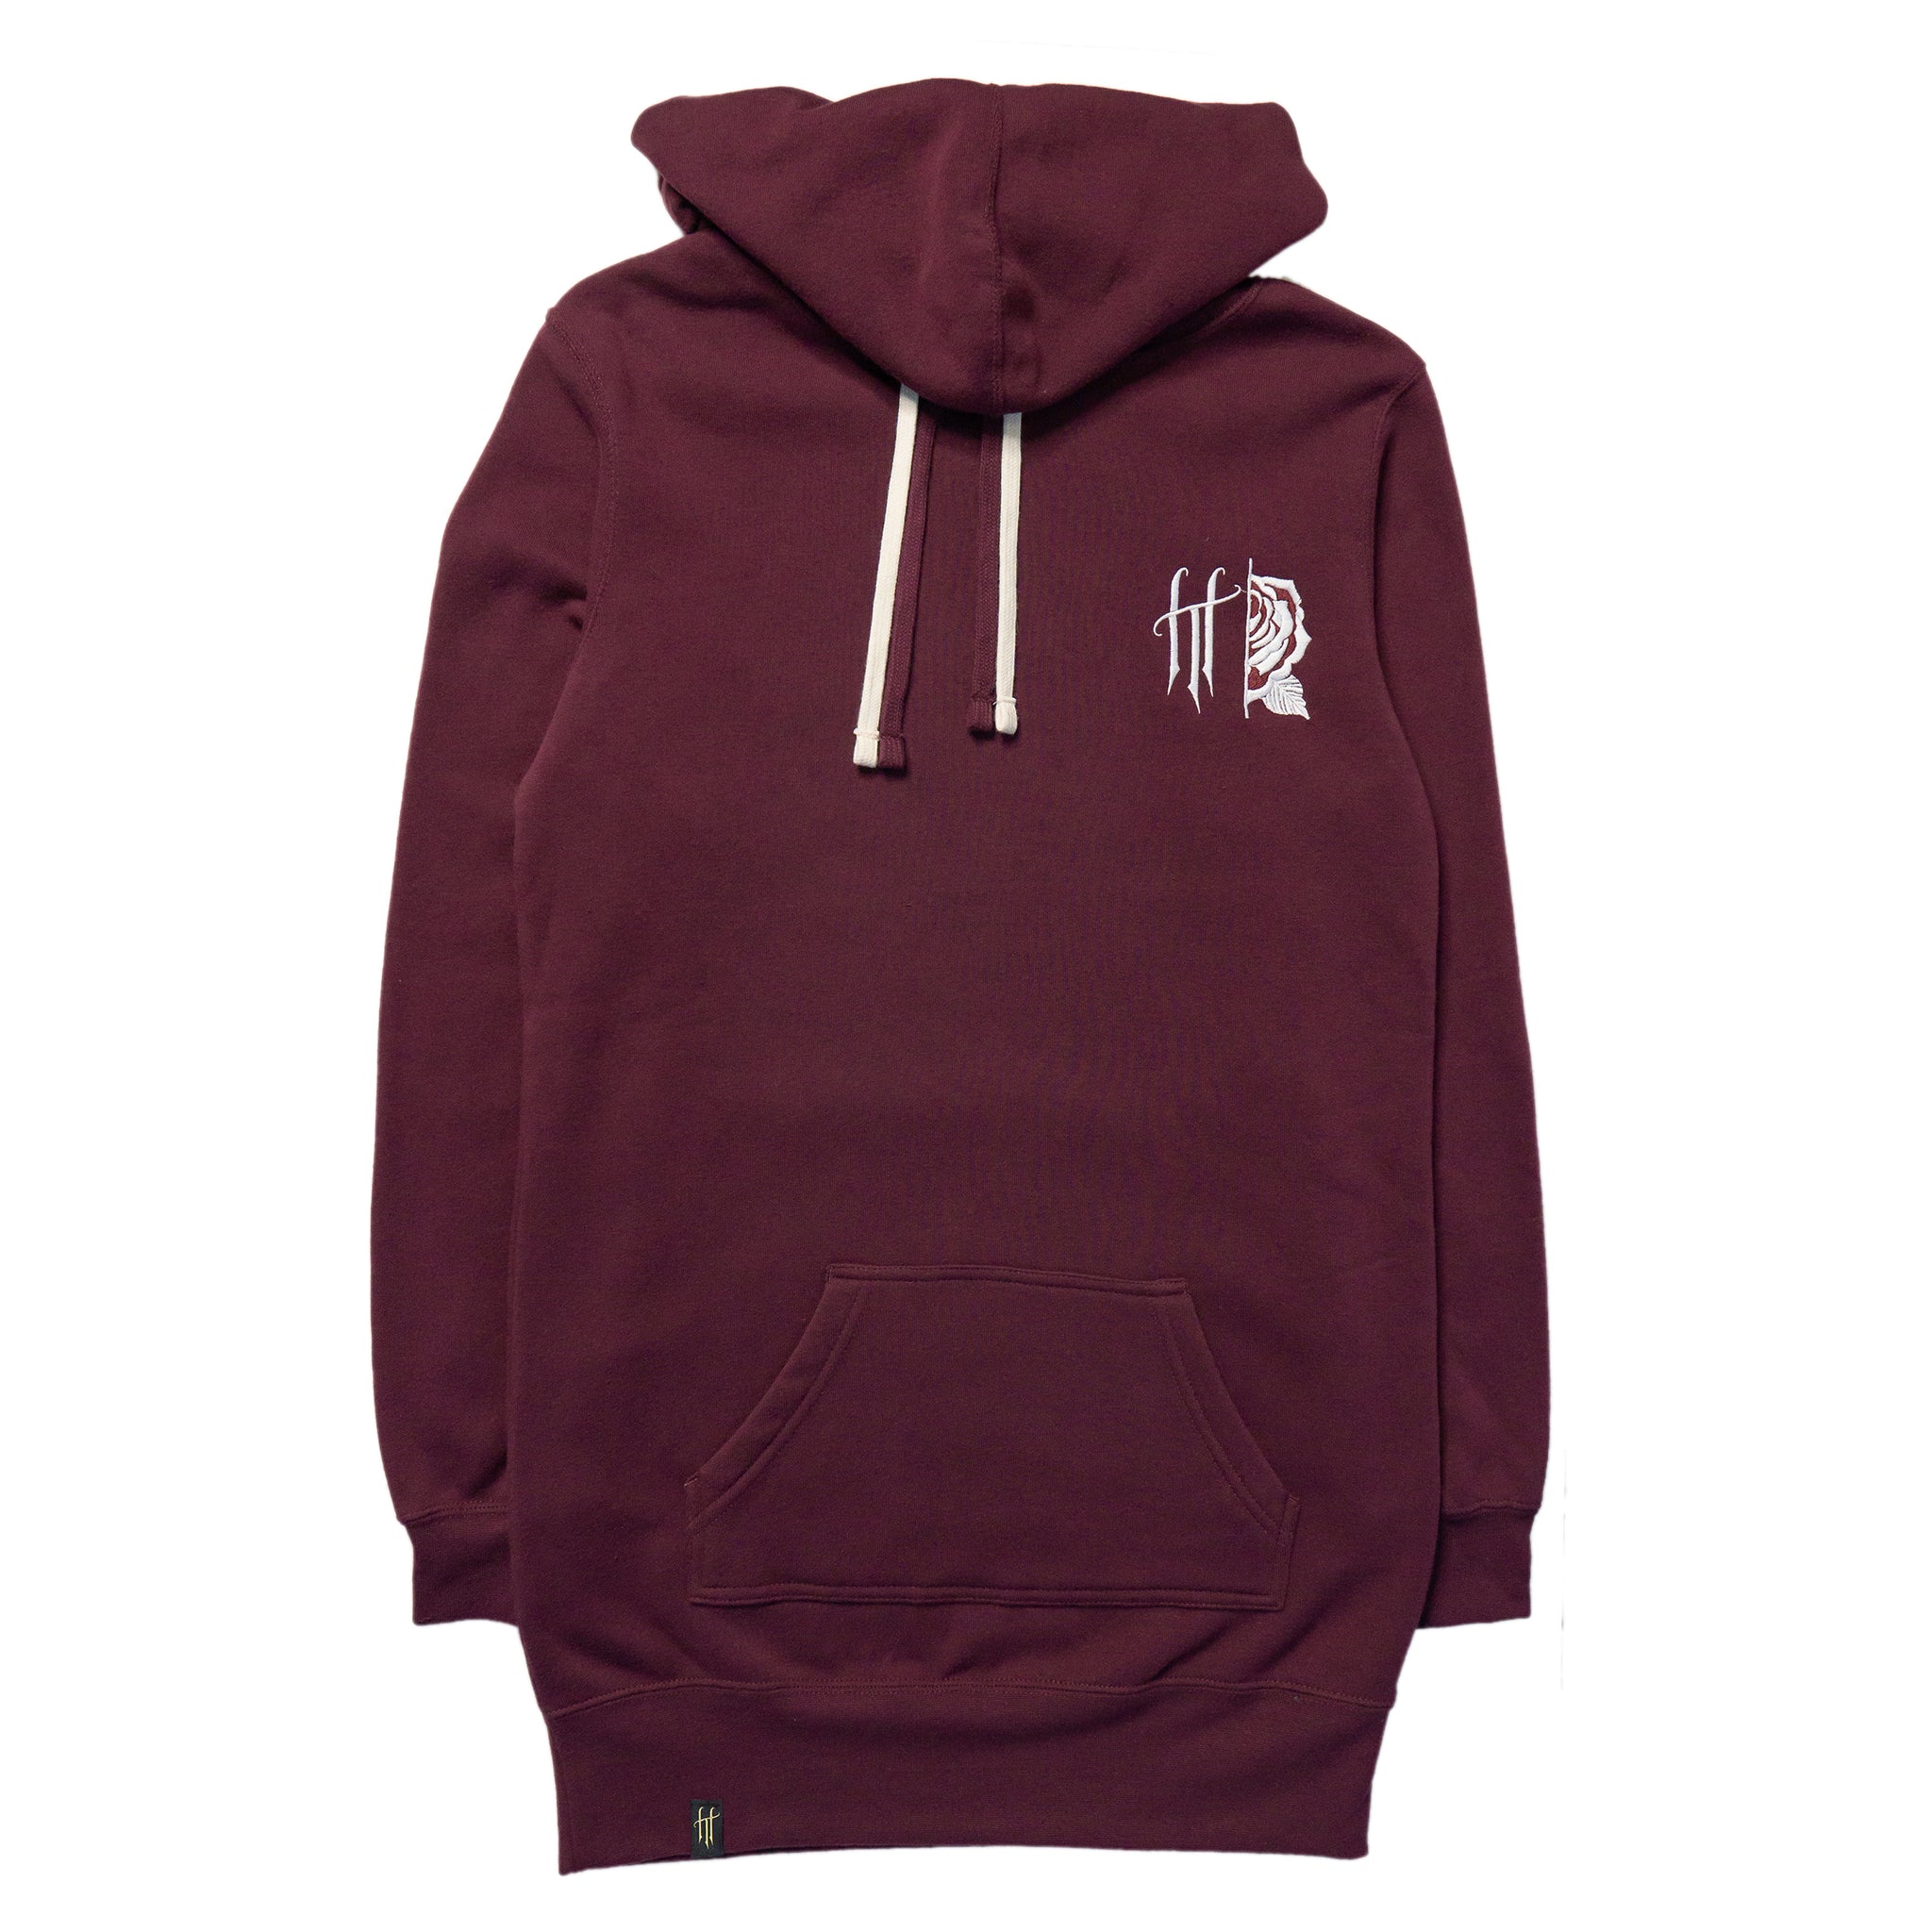 Horrific Thoughts Hooded Pullover Dress (Maroon)